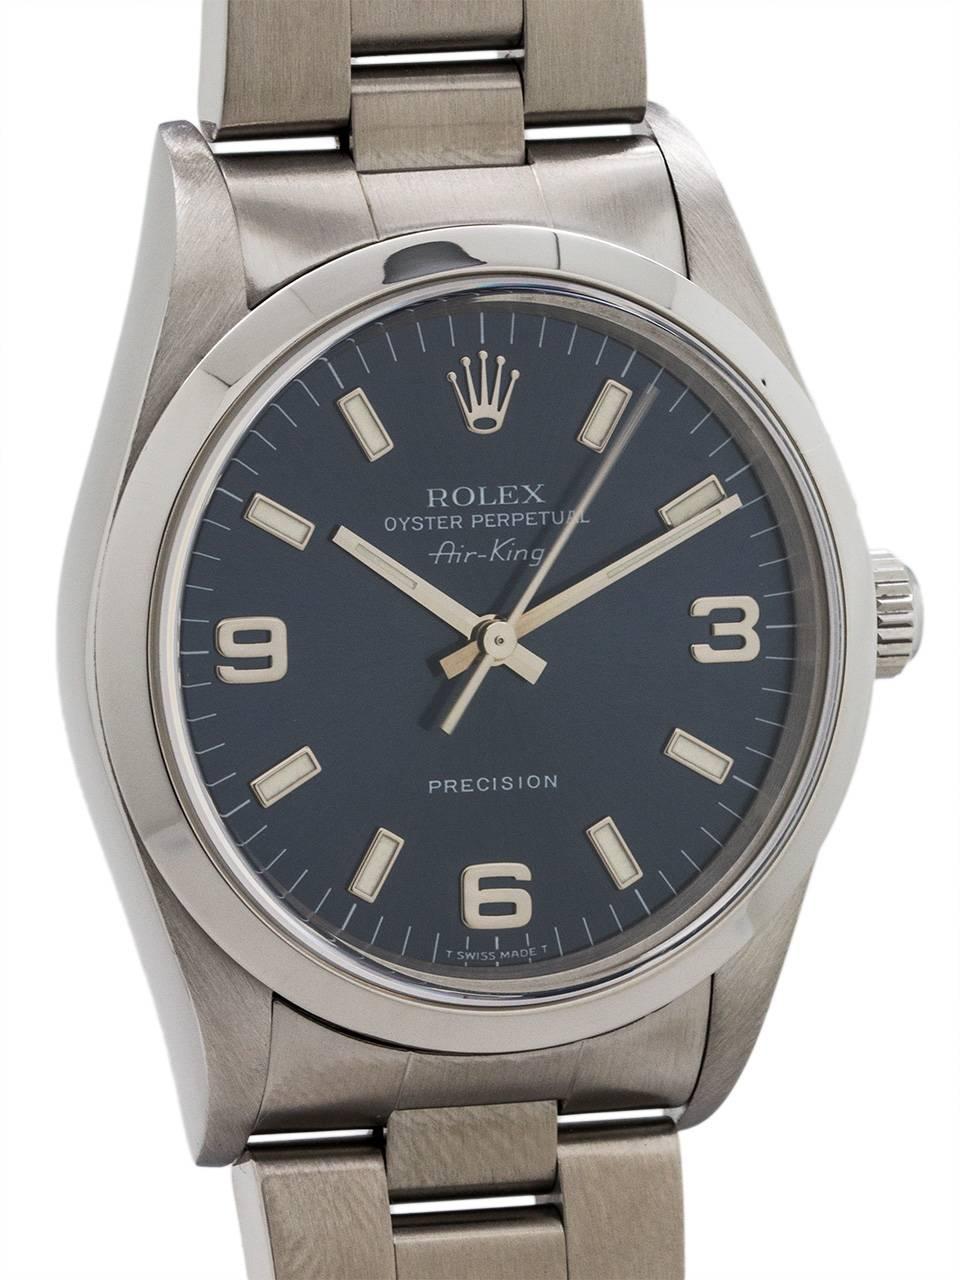 
Rolex stainless steel Airking ref 14000 U6 serial# circa 1997. Featuring 34mm diameter stainless steel case with smooth bezel and sapphire crystal. With popular blue 3/6/9 Explorer style dial with luminous indexes and hands. Powered by self winding